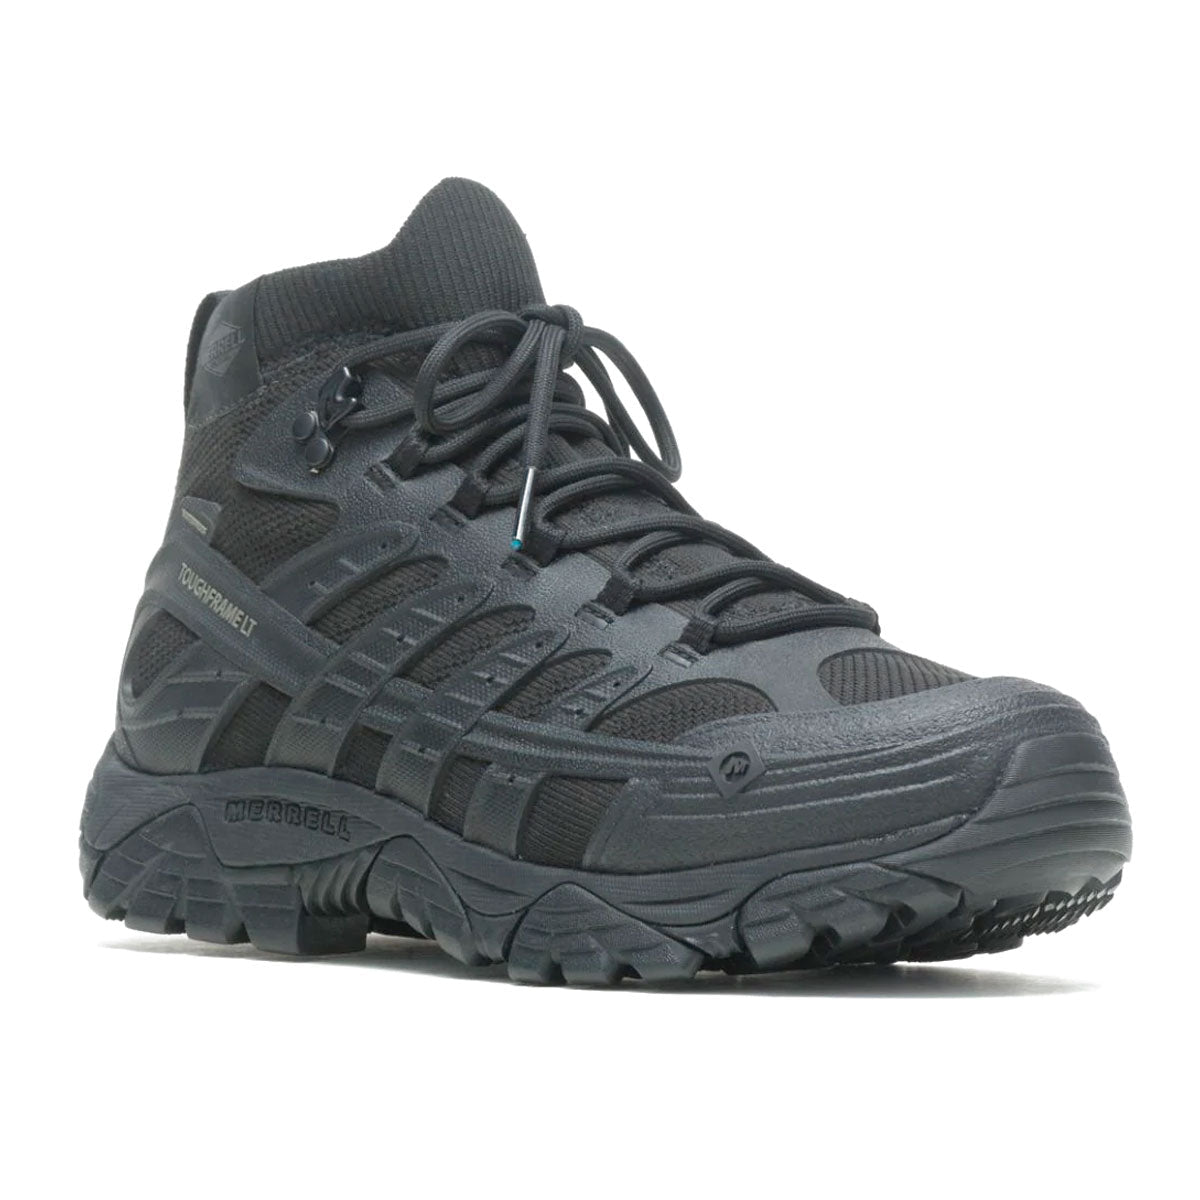 Merrell Tactical Moab Velocity Tactical Mid Waterproof Boot Black Limited Sizes Footwear Merrell Tactical Tactical Gear Supplier Tactical Distributors Australia